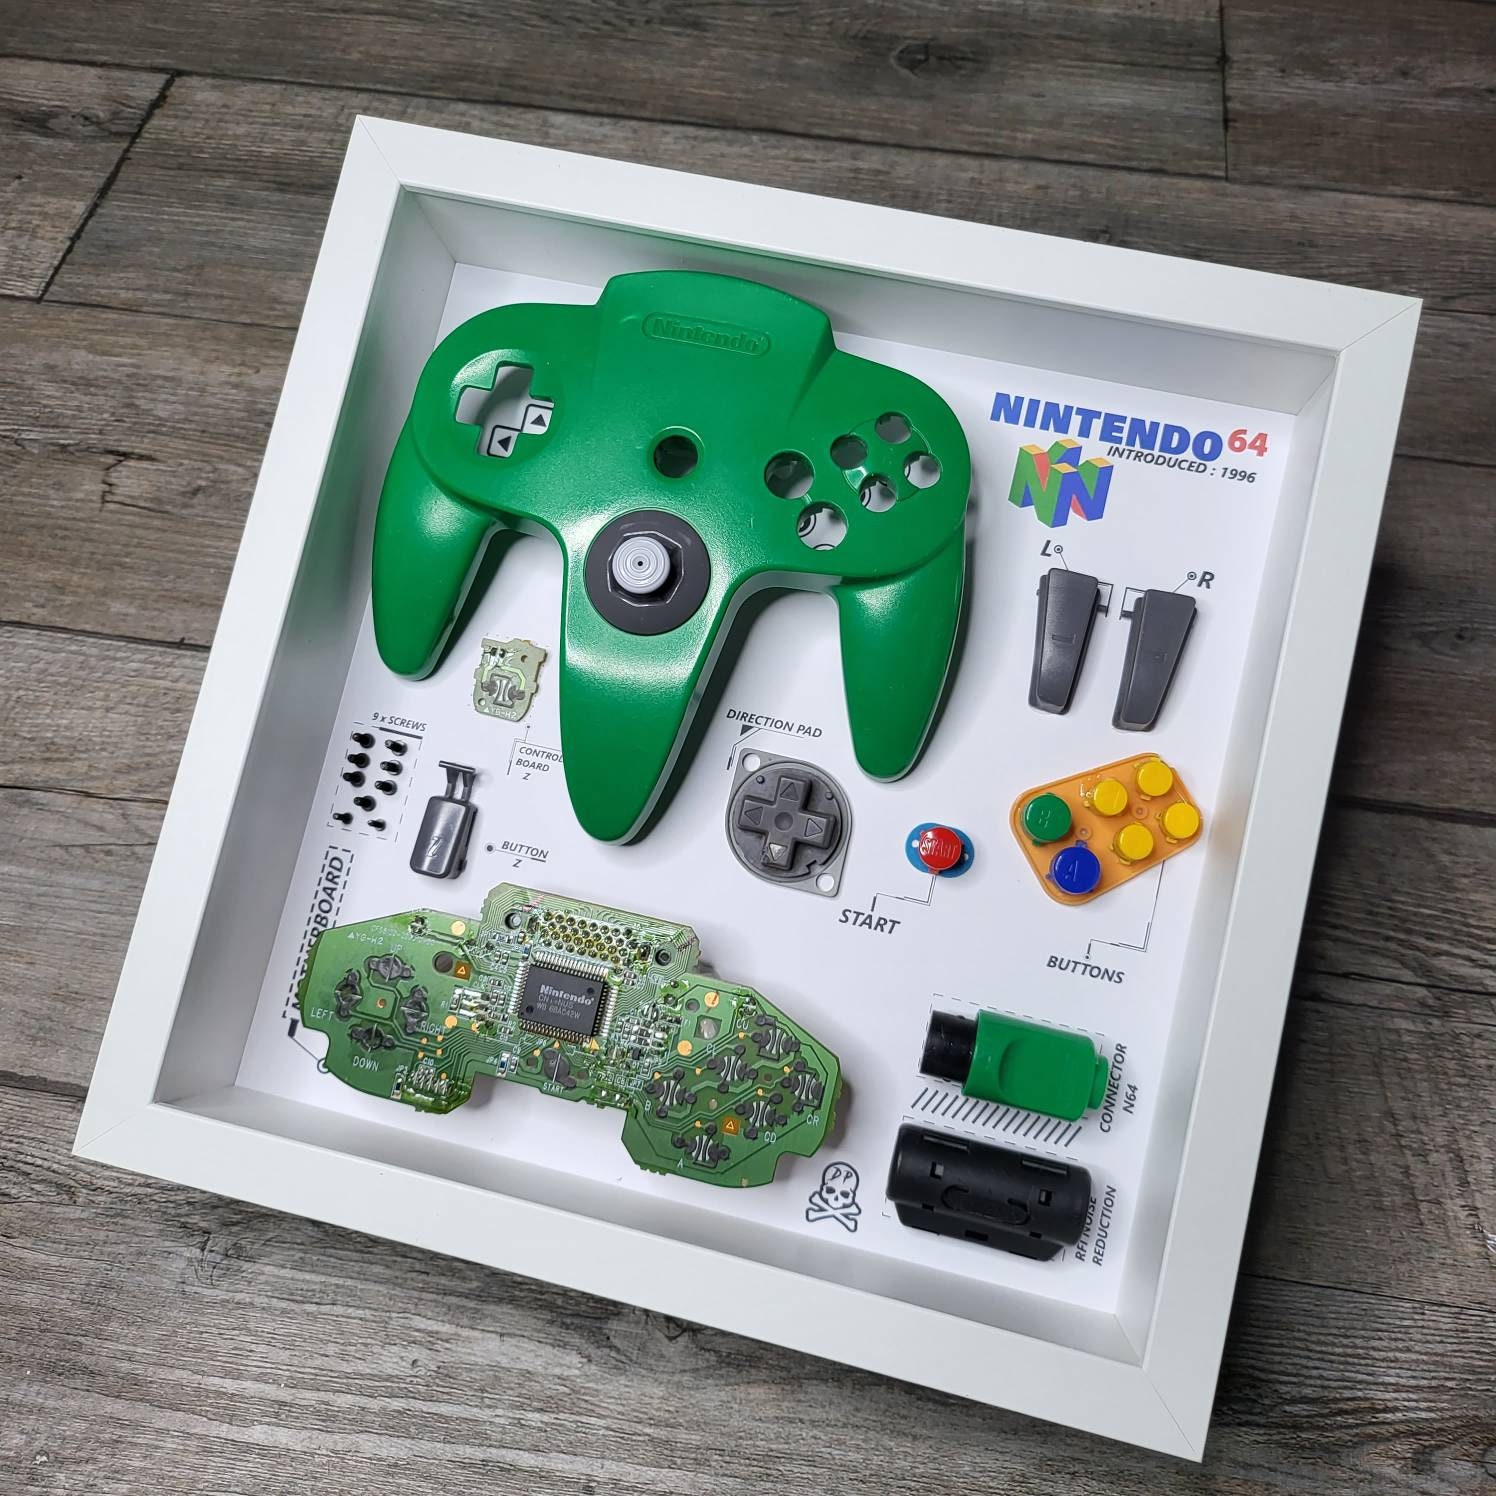 Game Cube Gamecube Shadowbox Diorama Controller Disassembled Console Wall  Art Gifts for Friends Wall Decor Custom Painting Nerd Geek Nintendo -   Denmark